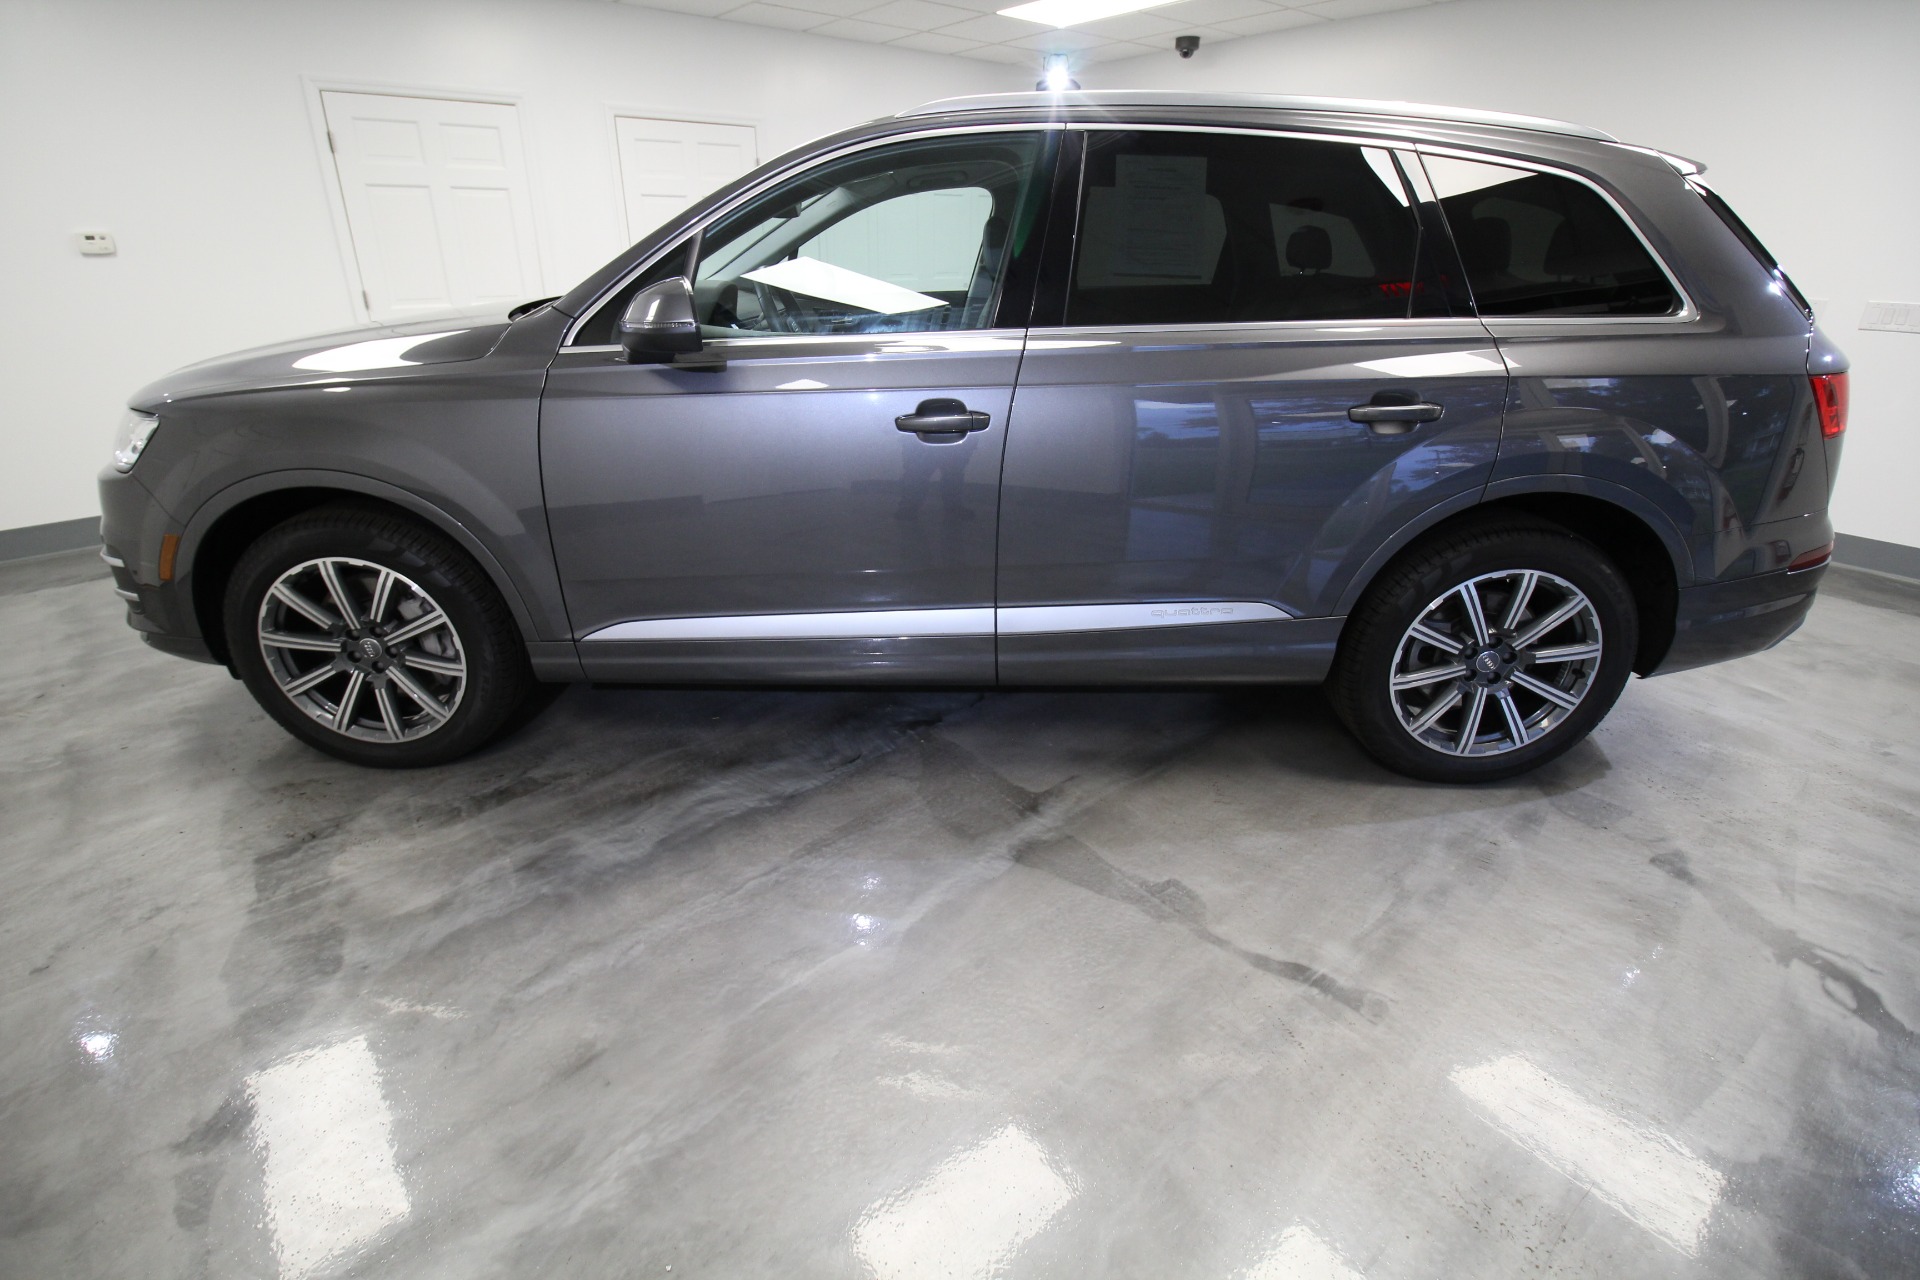 Used 2019 GREY Audi Q7 2.0T Premium quattro SUPERB CONDITION 20in WHEELS CONVENIENCE PKG AND MORE | Albany, NY